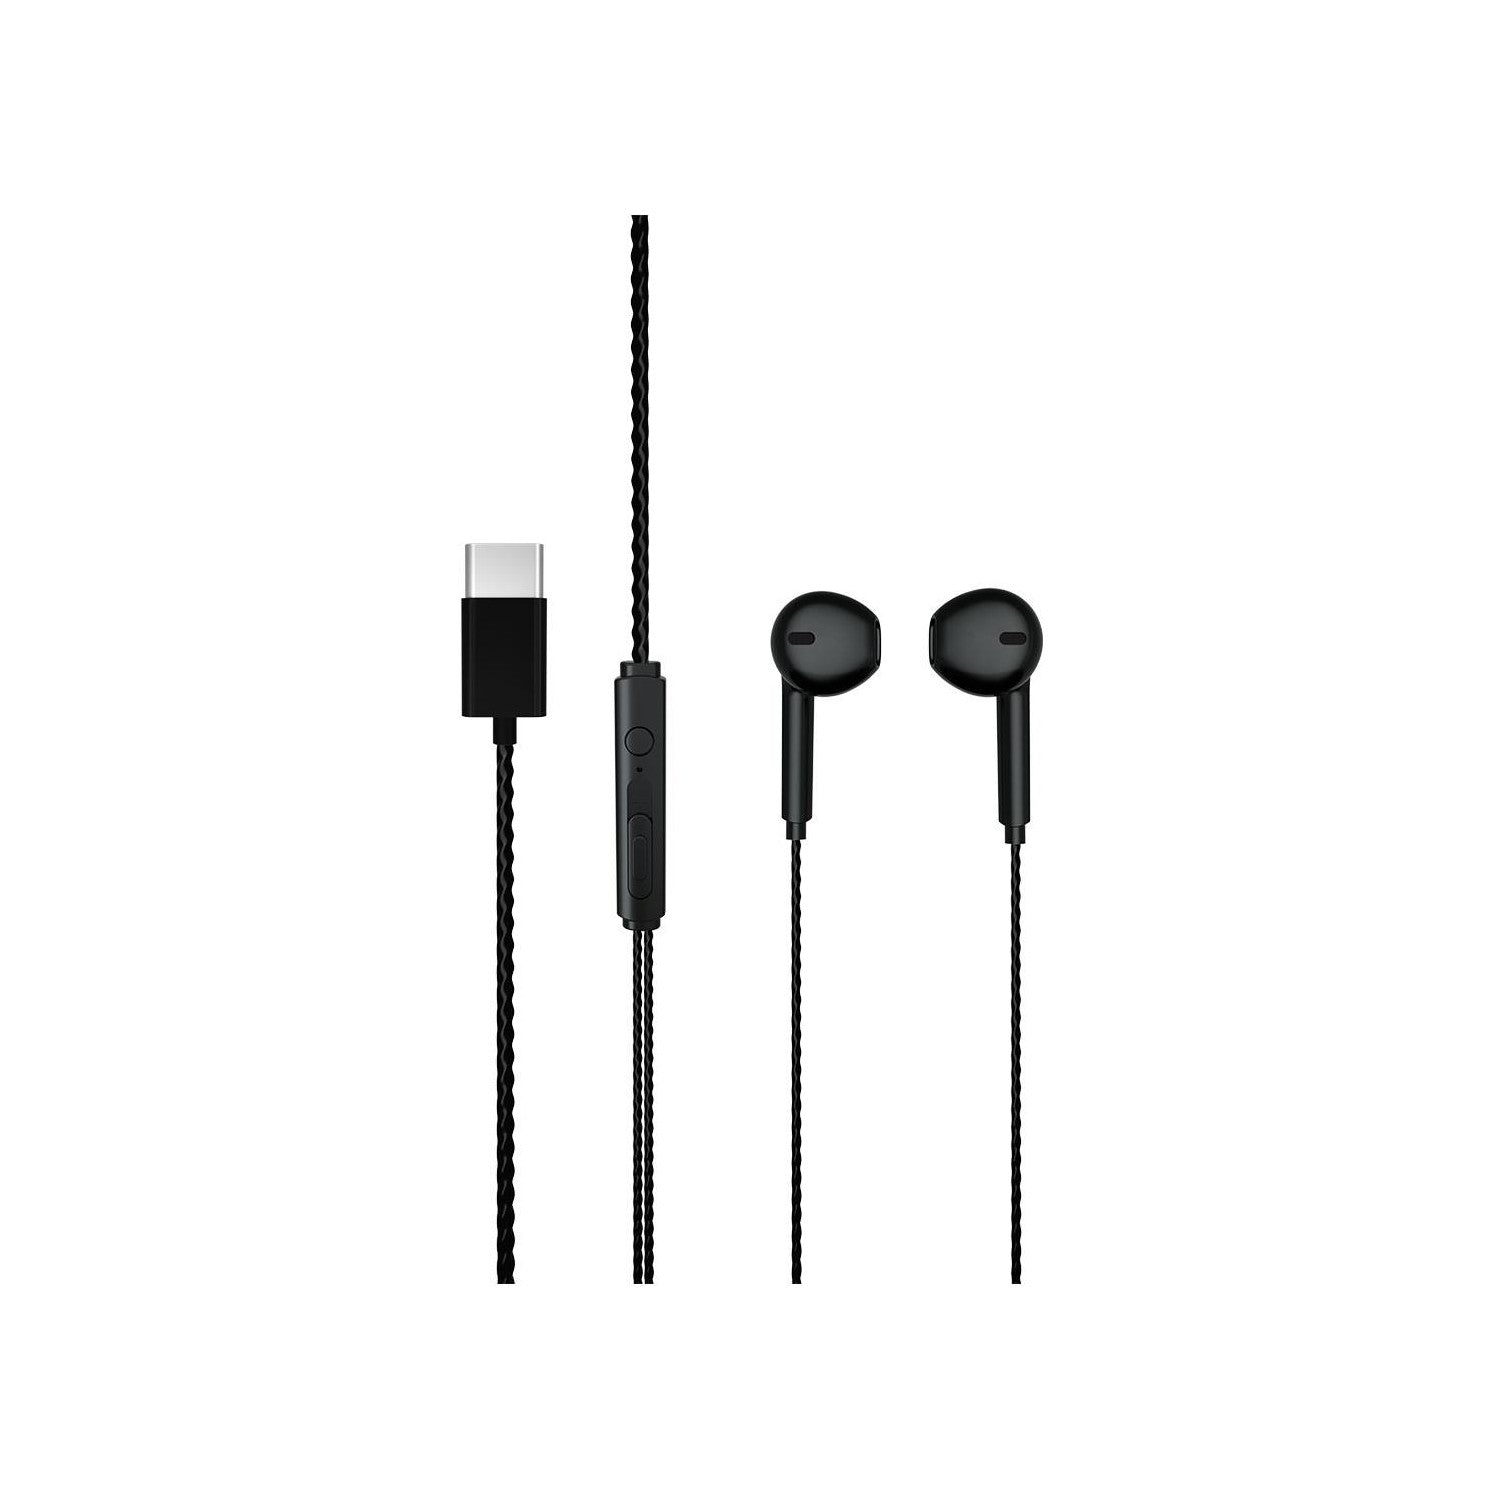 Lecoo EH104 Wired Earphones